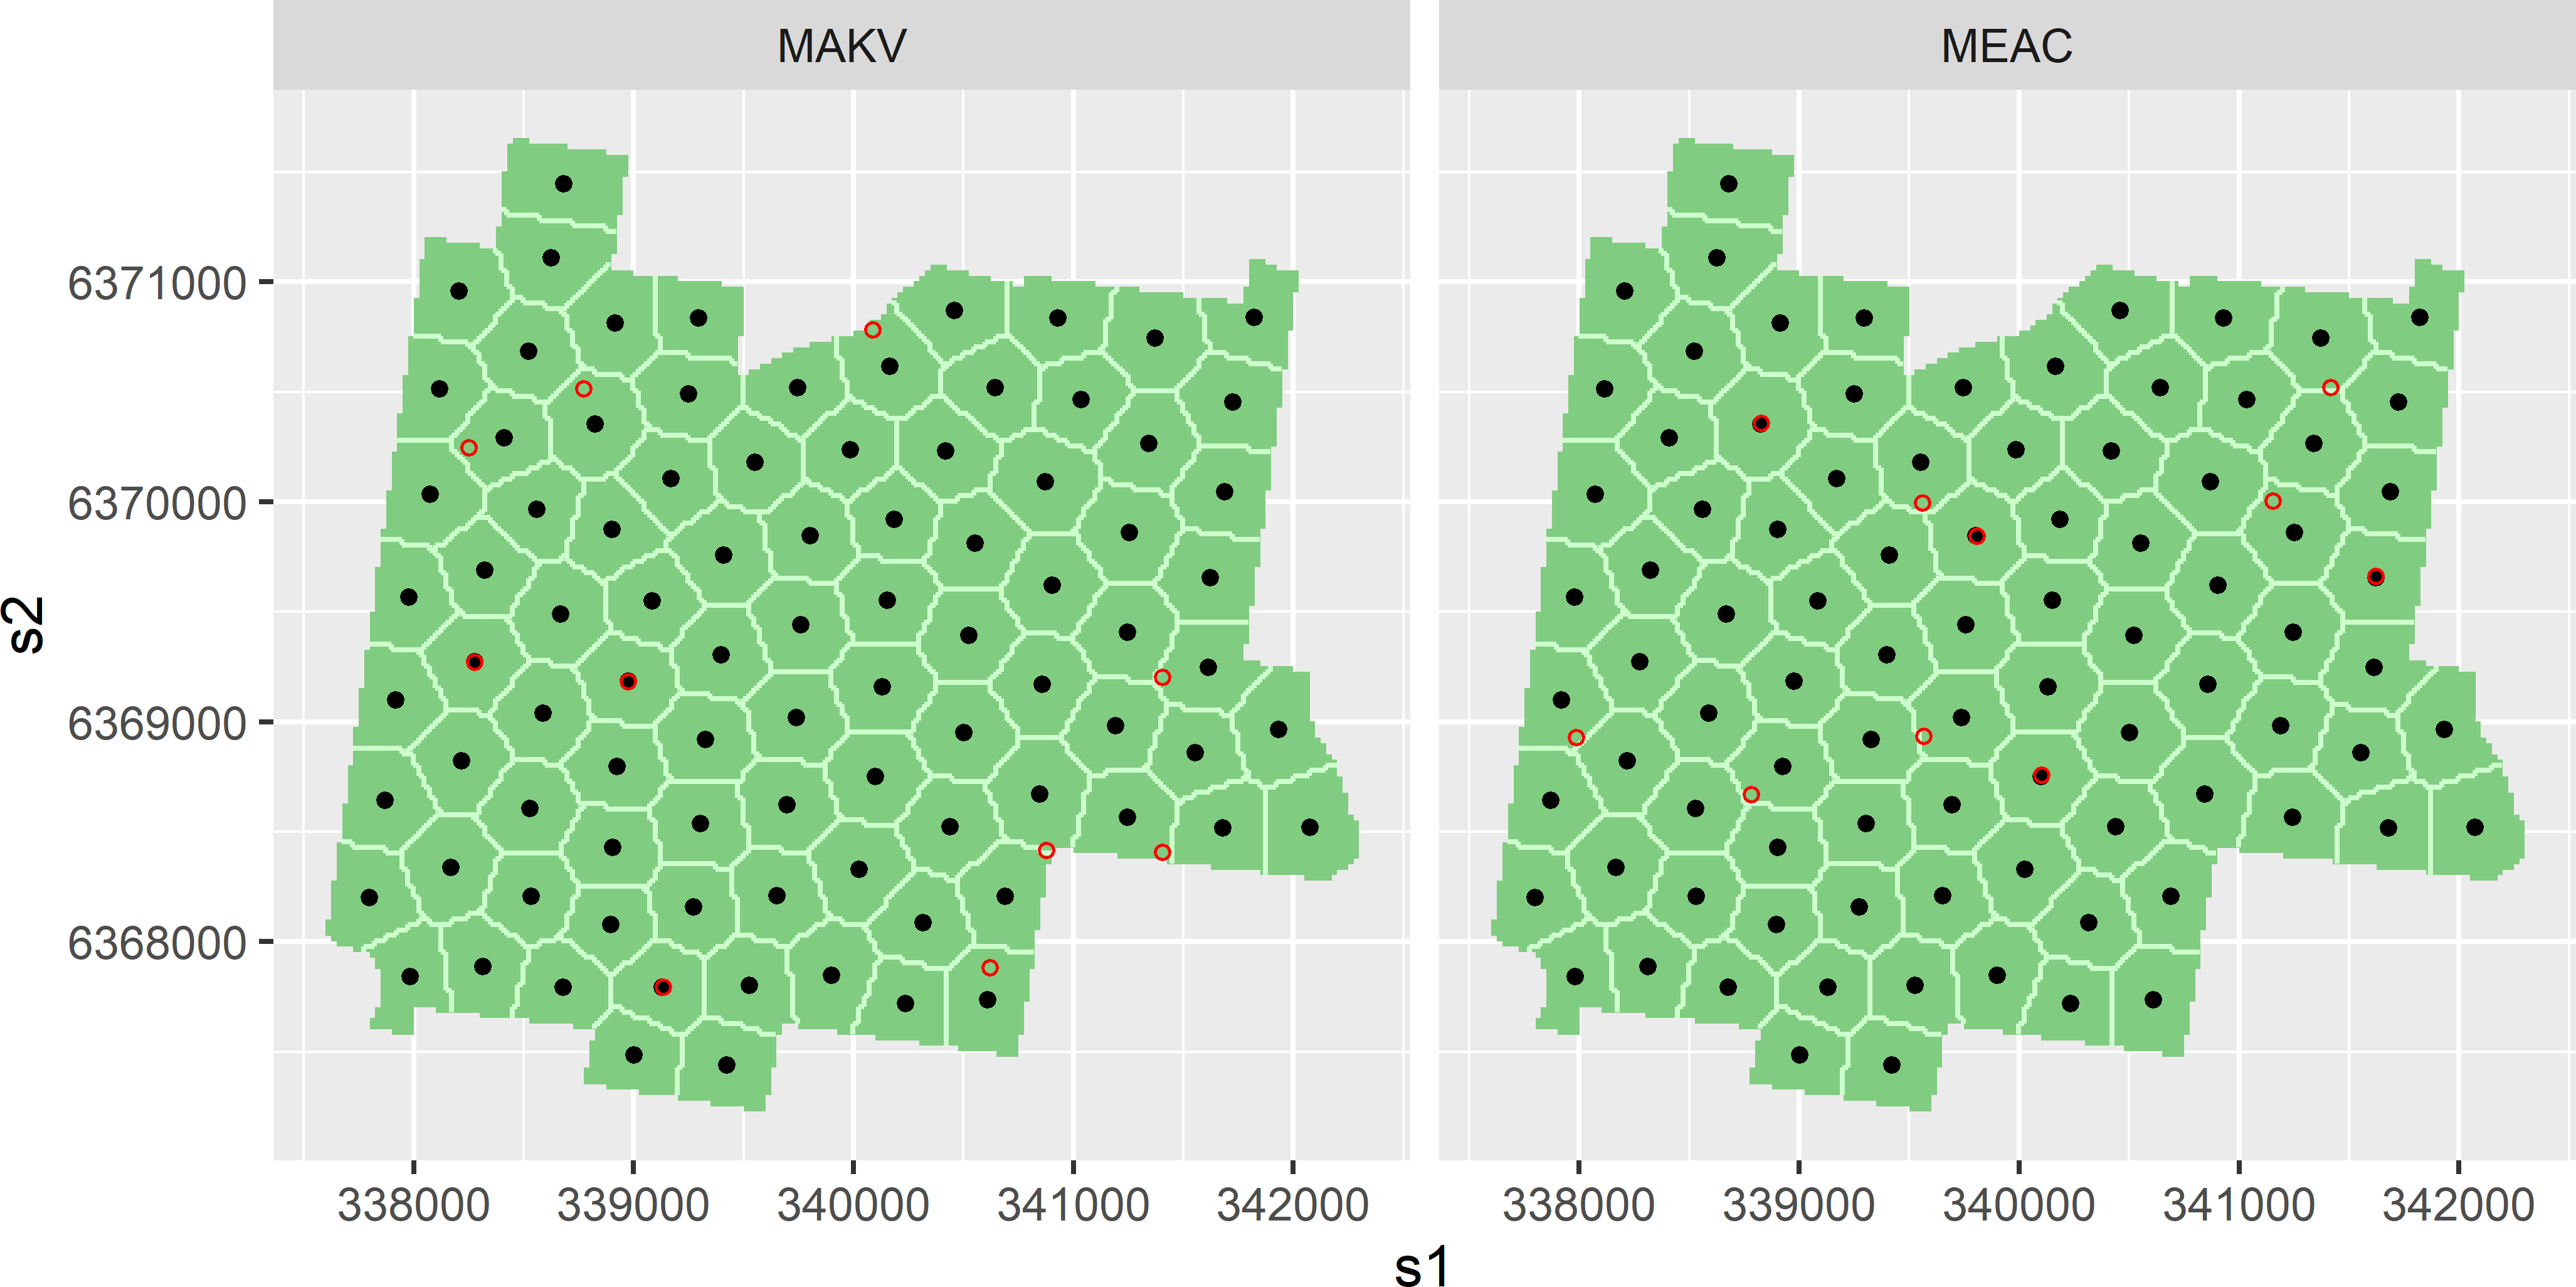 Optimised sampling pattern of 10 points supplemented to spatial coverage sample of 90 points, for semivariogram estimation and prediction, using the mean augmented kriging variance (MAKV) and the mean estimation adjusted criterion (MEAC) as a minimisation criterion. The prior semivariogram used in optimising the sampling pattern of the supplemental sample is an exponential semivariogram with a range of 200 m and a ratio of spatial dependence of 0.5.